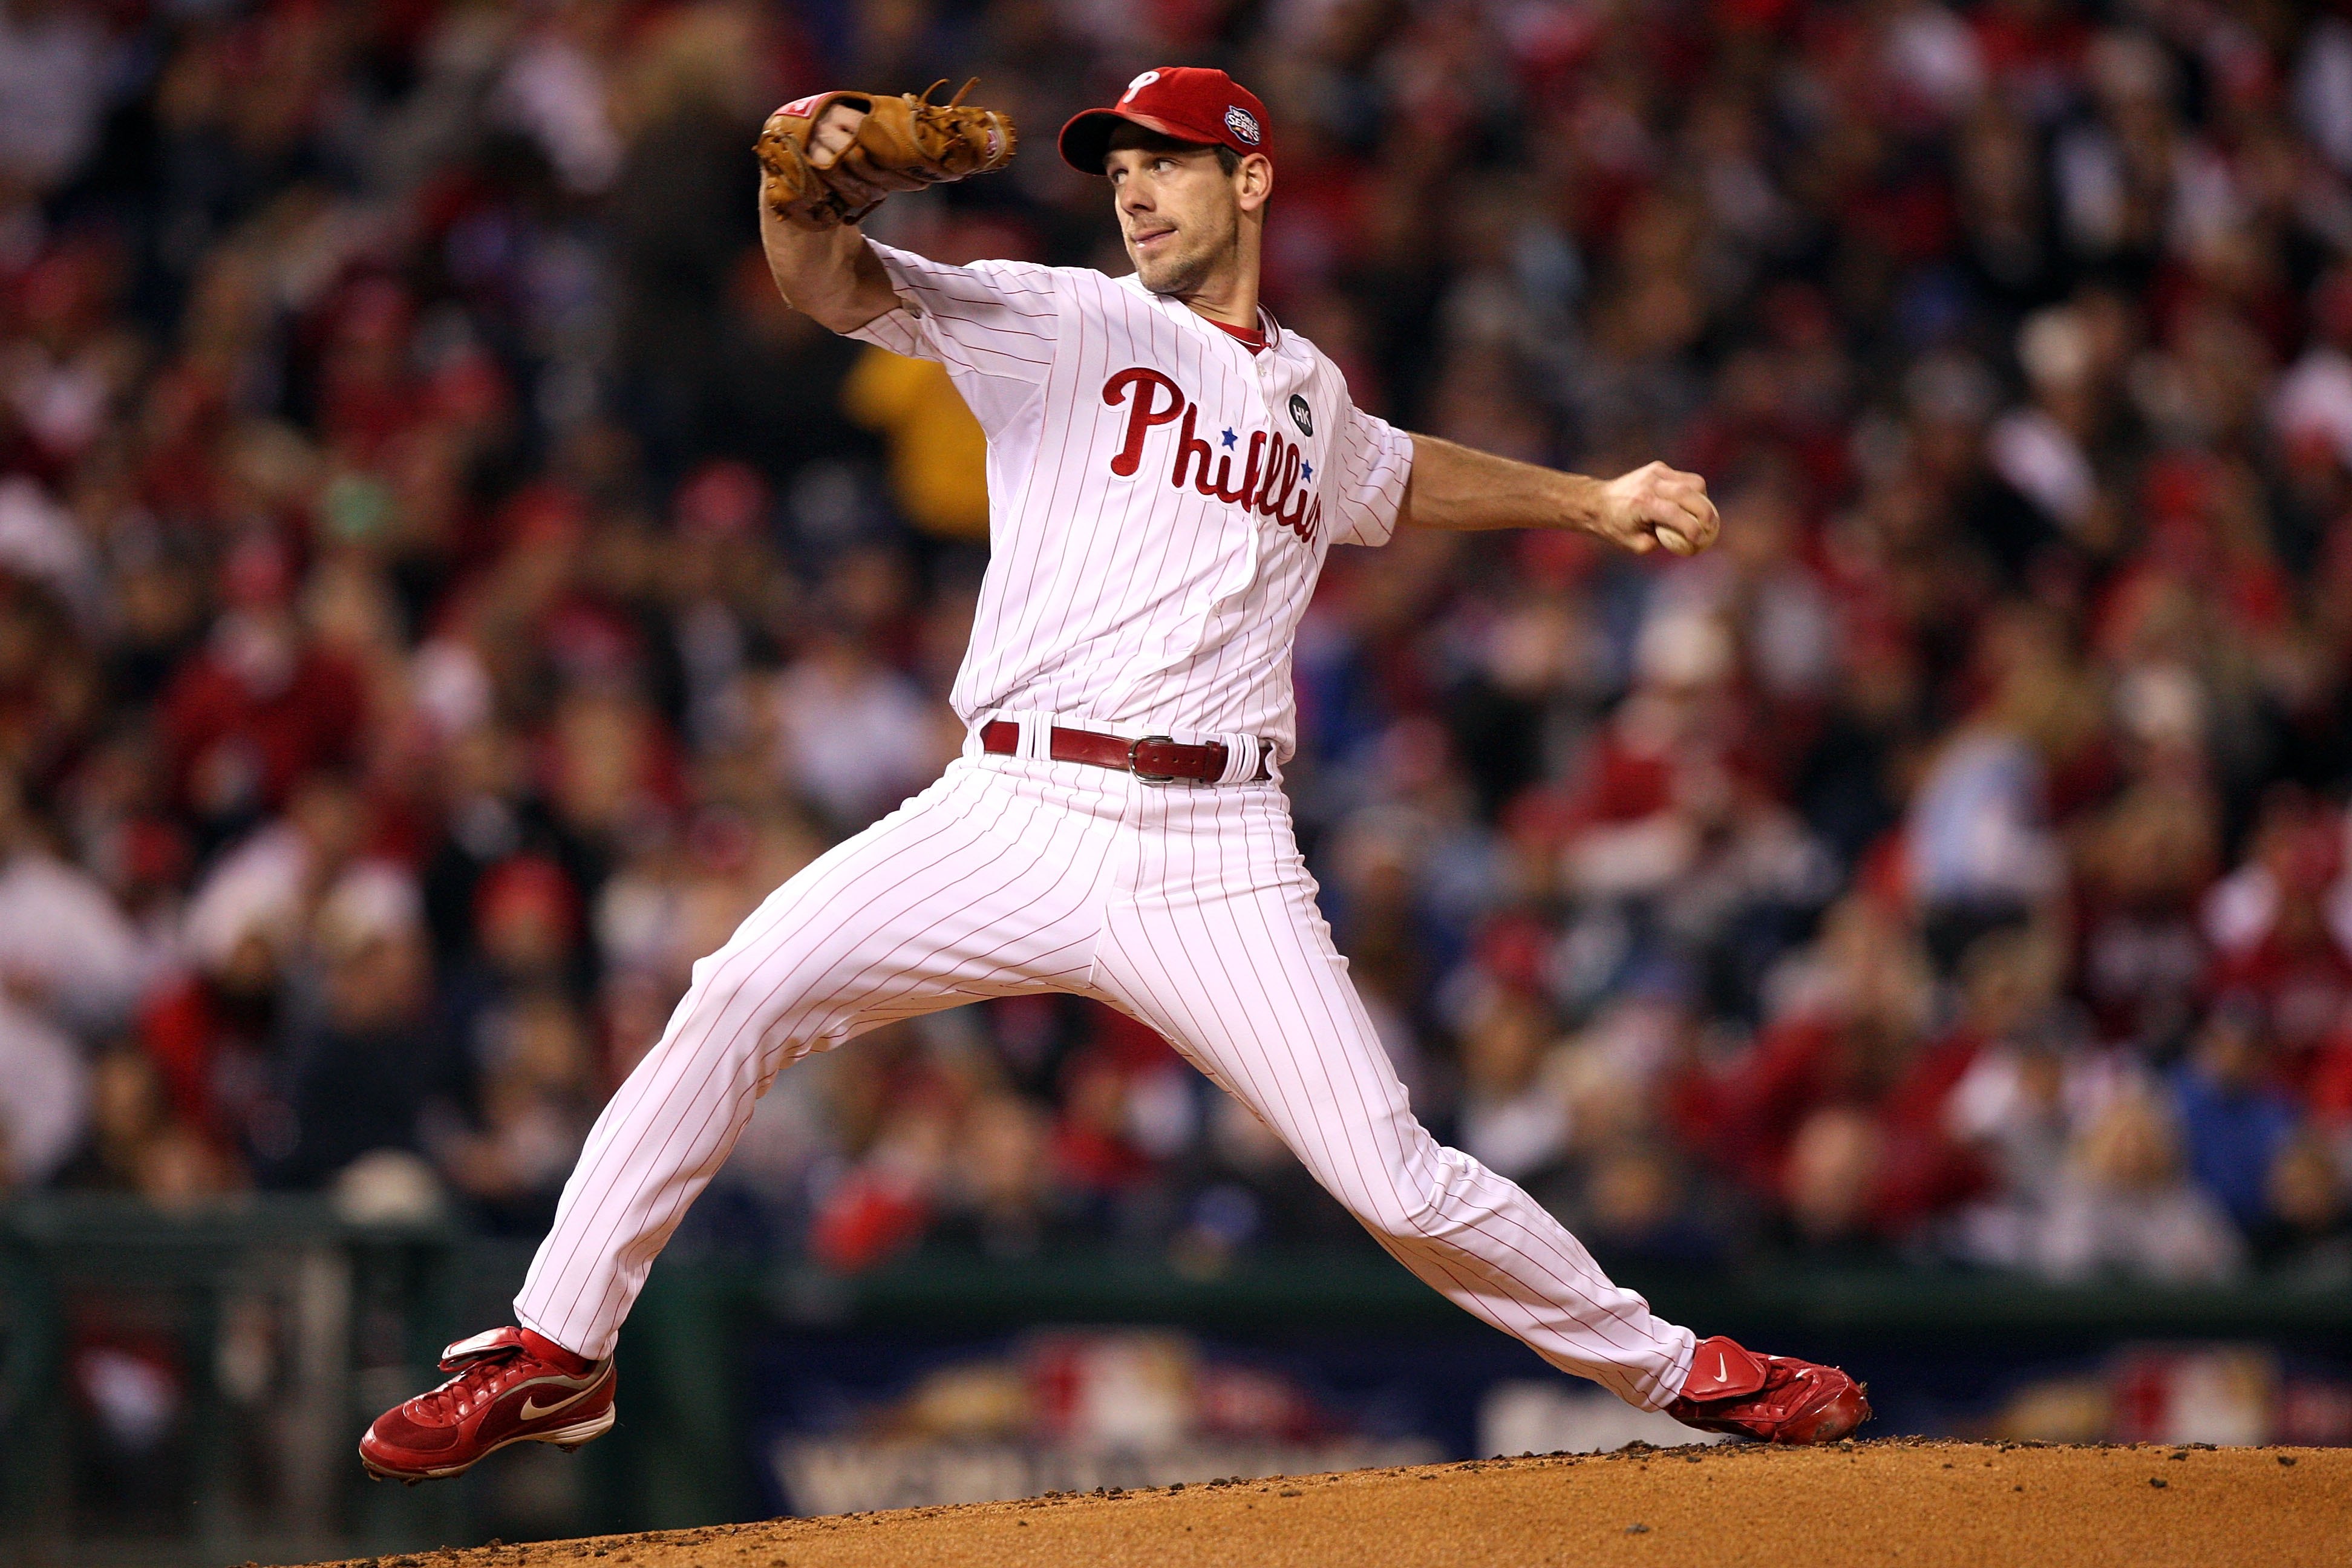 File:Cliff Lee, philly crop.jpg - Wikipedia